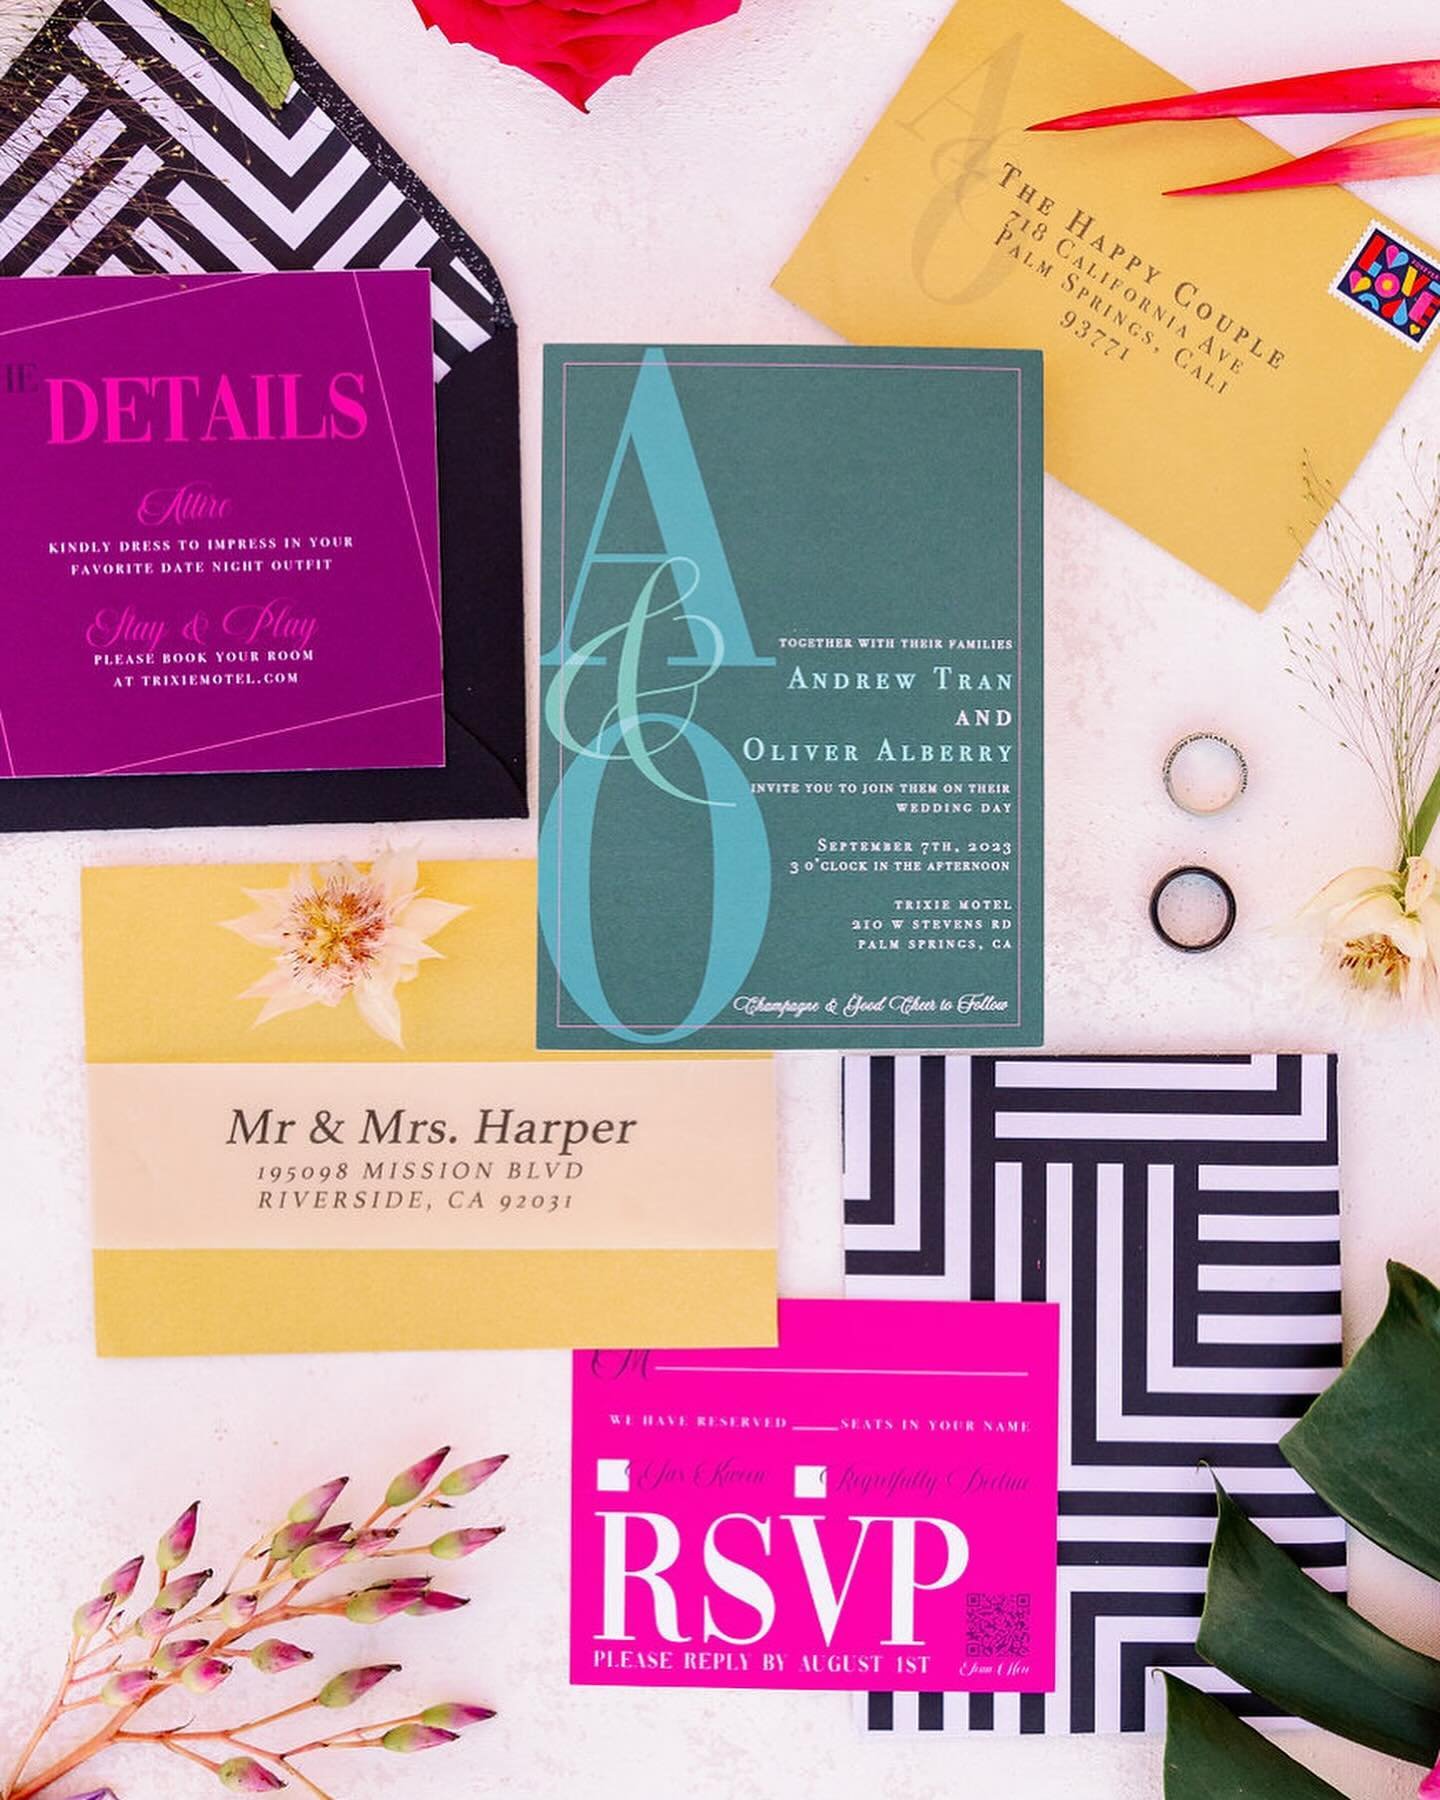 What is a flat lay? 🤔

A flatlay for wedding invites is a stylized arrangement of the wedding invitation suite laid out flat and photographed from above. It usually includes the invitation itself, along with any accompanying cards like RSVP cards, d